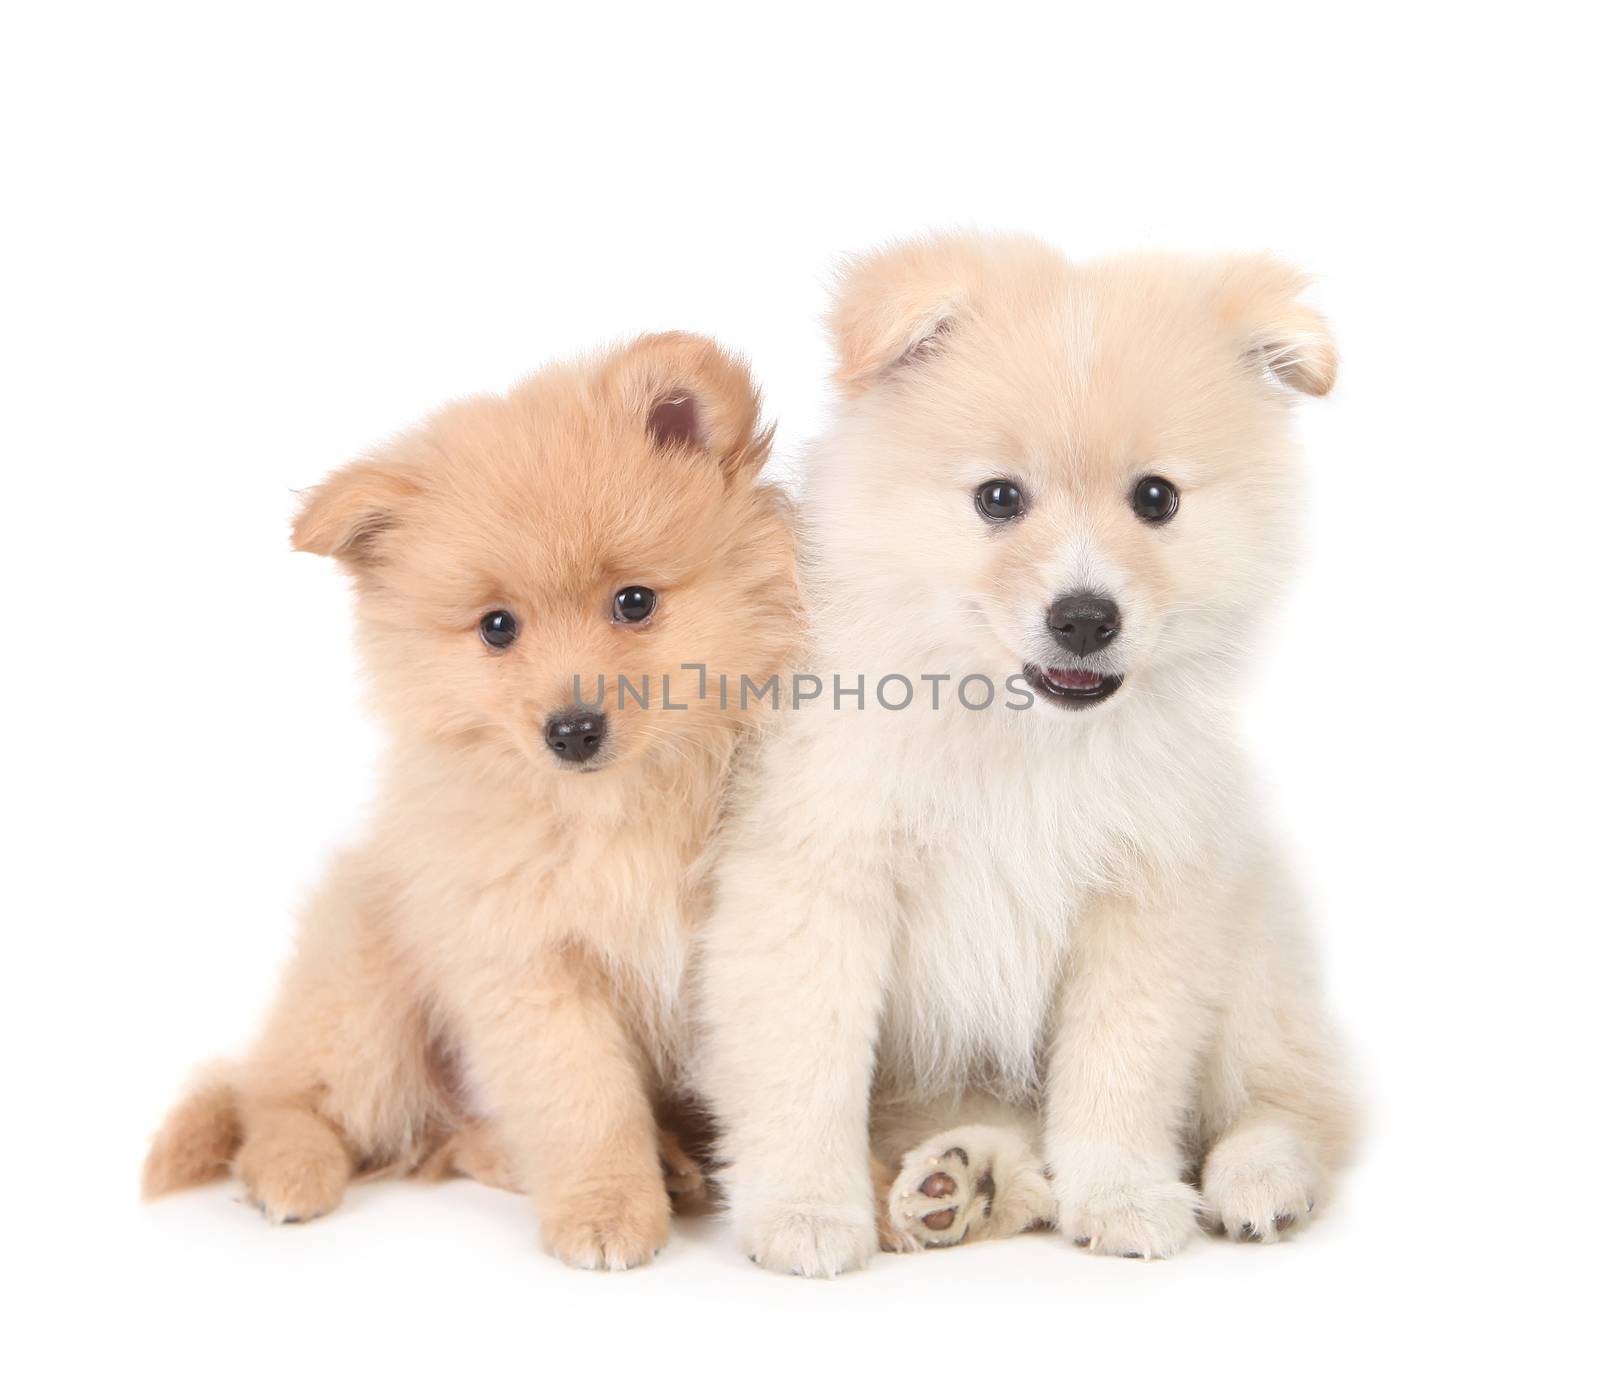 Happy Pomeranian Puppies Cuddling Together on White Background by tobkatrina